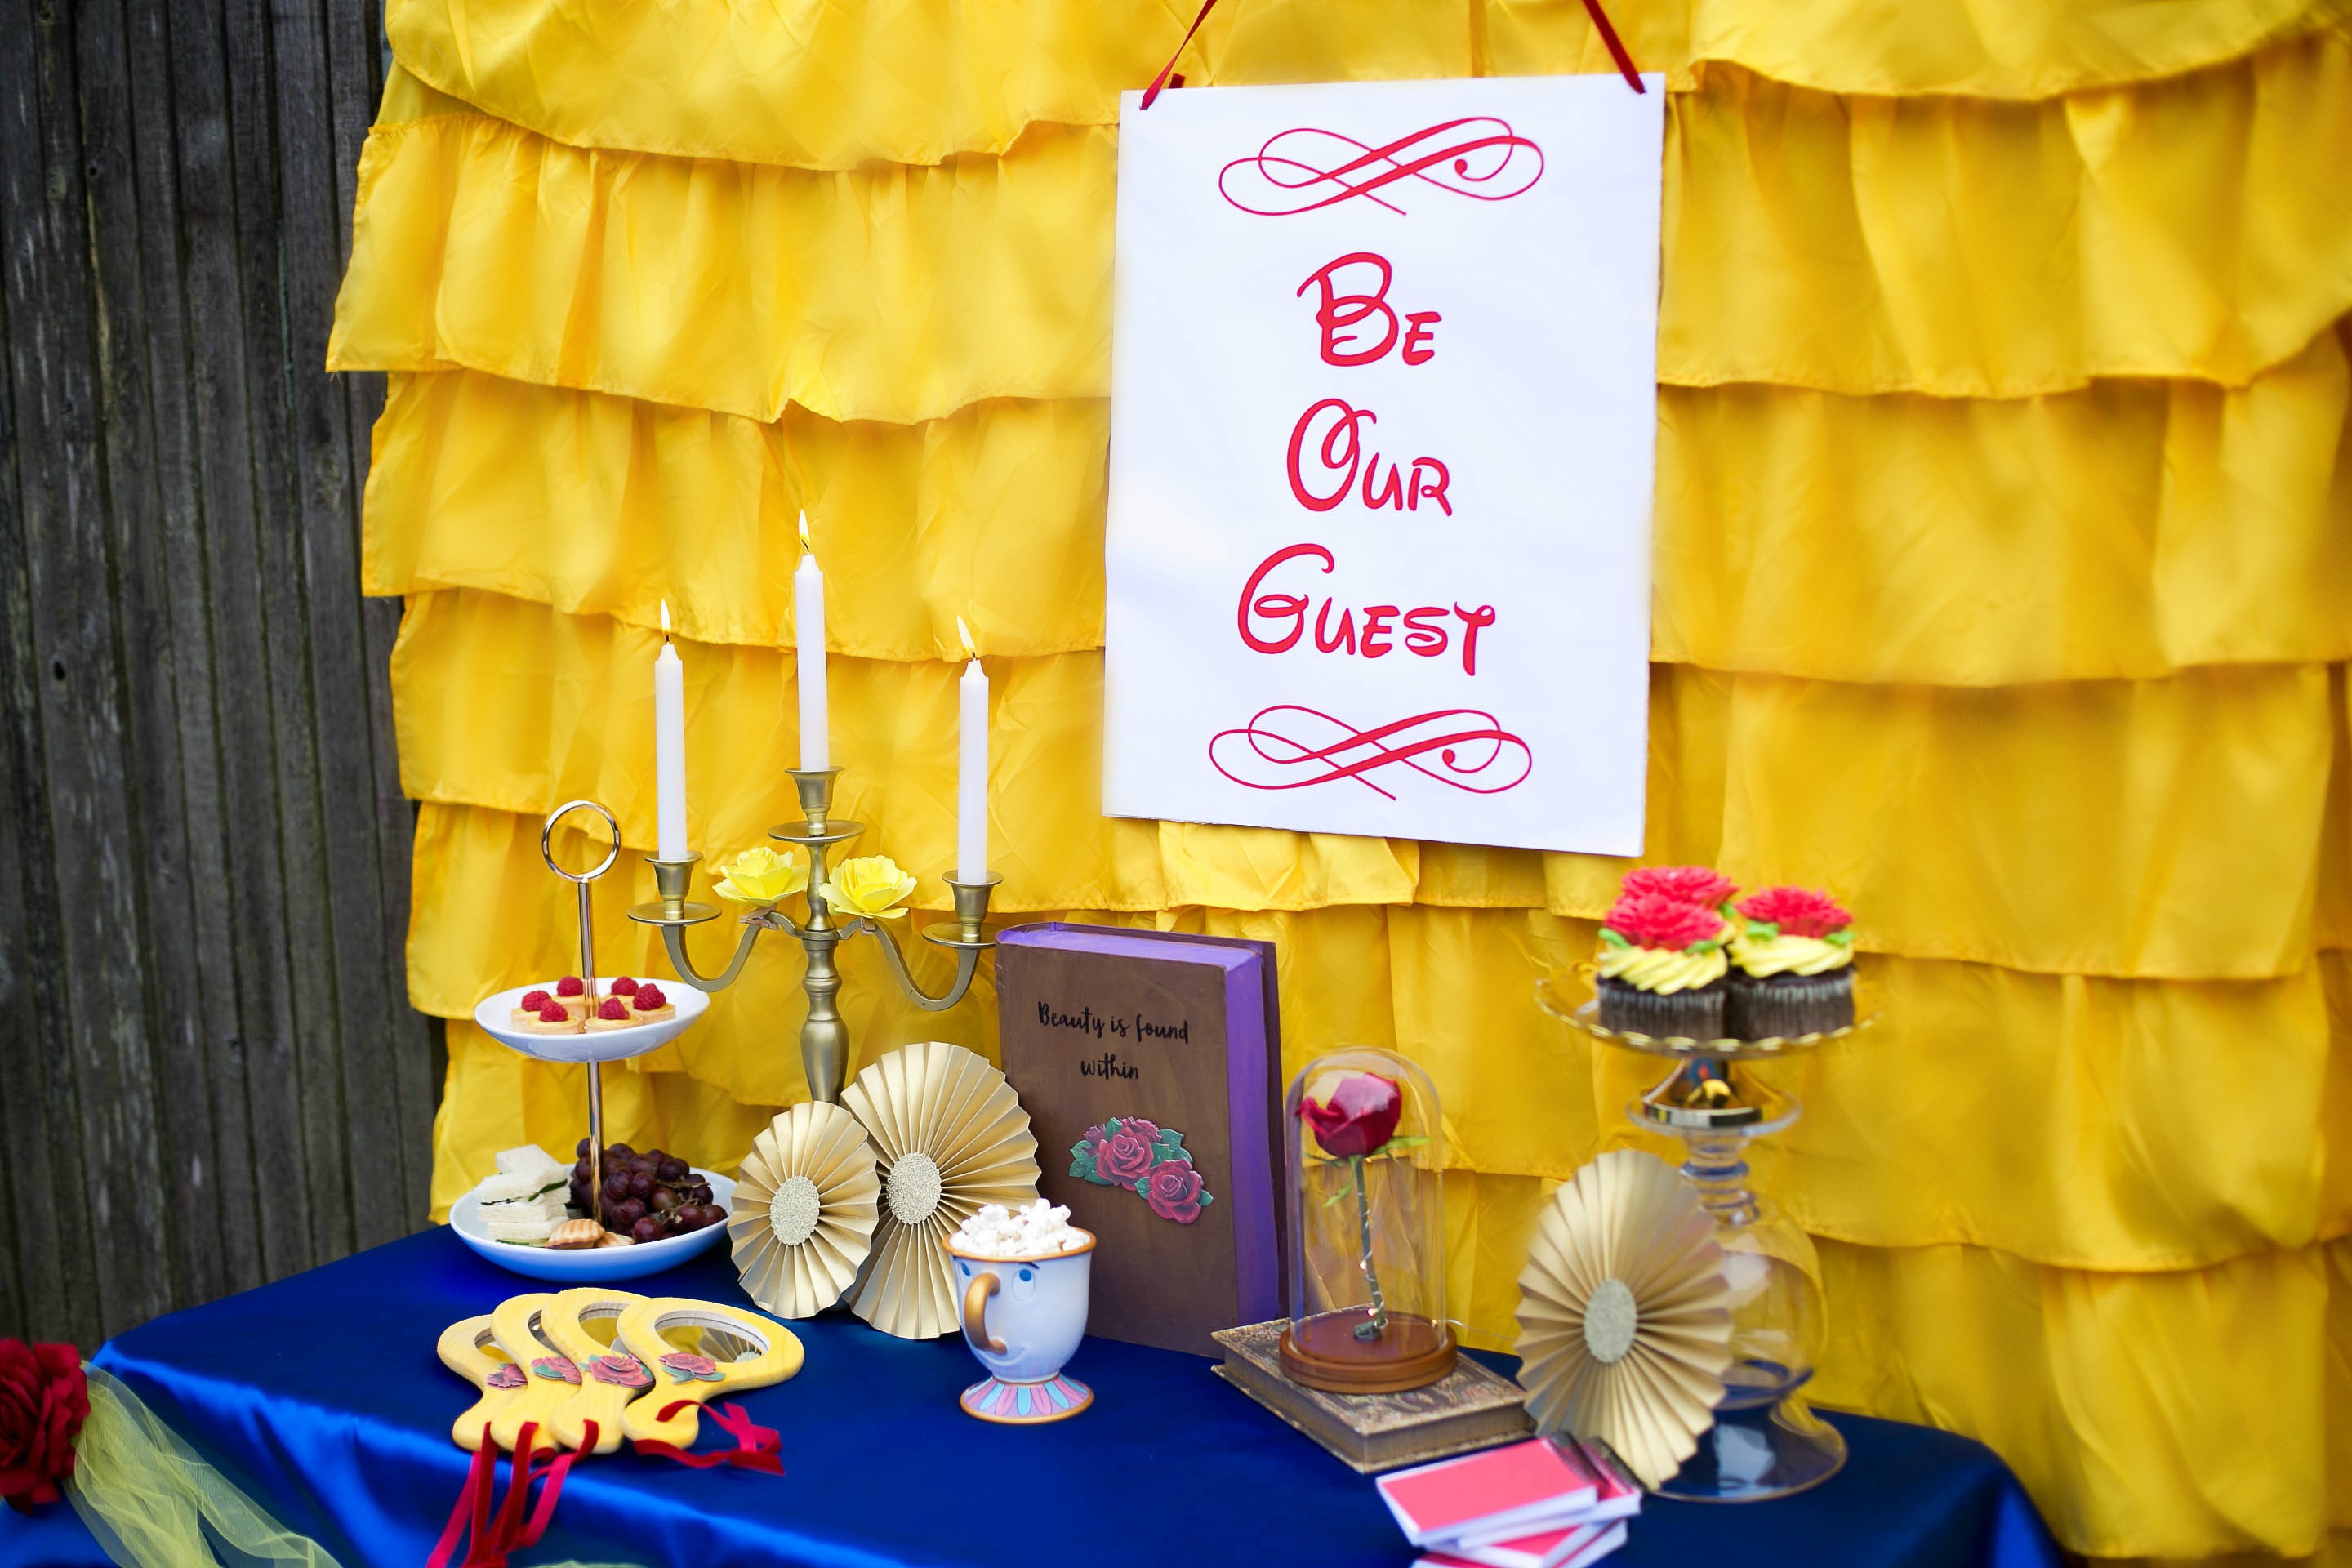 BEAUTY AND THE BEAST TEA PARTY